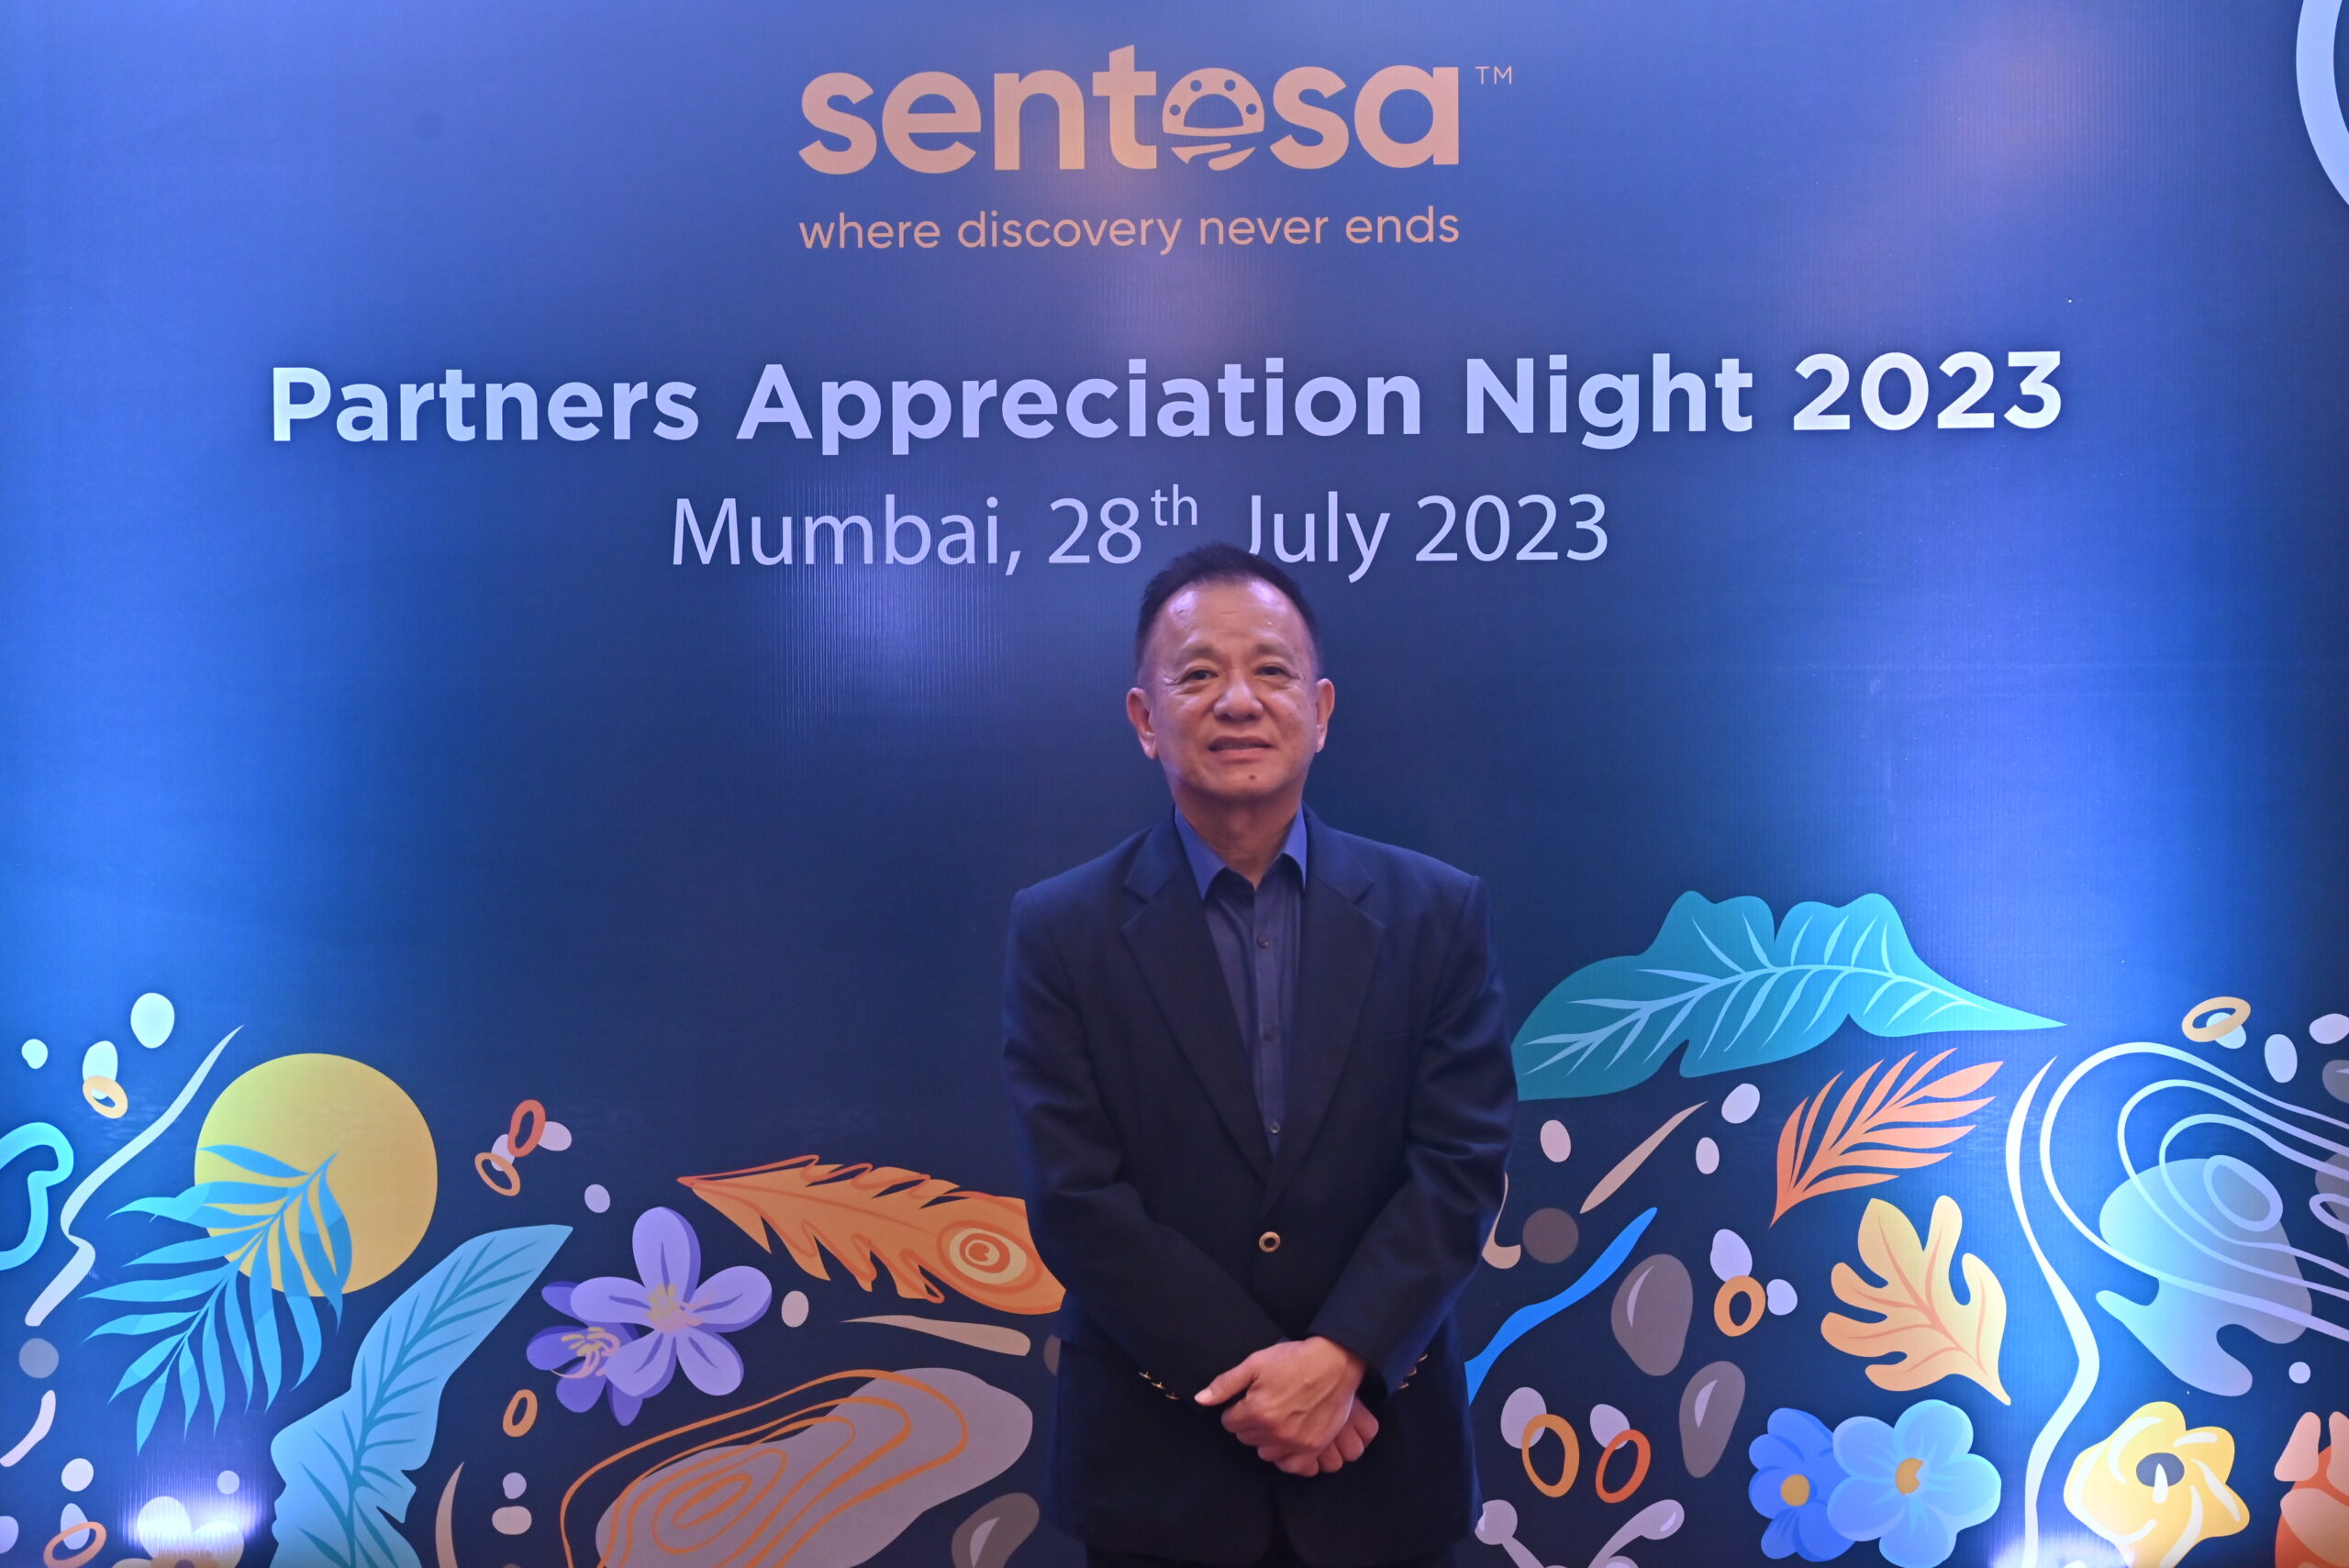 ‘Currently, Indian travellers constitute the largest proportion of Sentosa’s international guests’